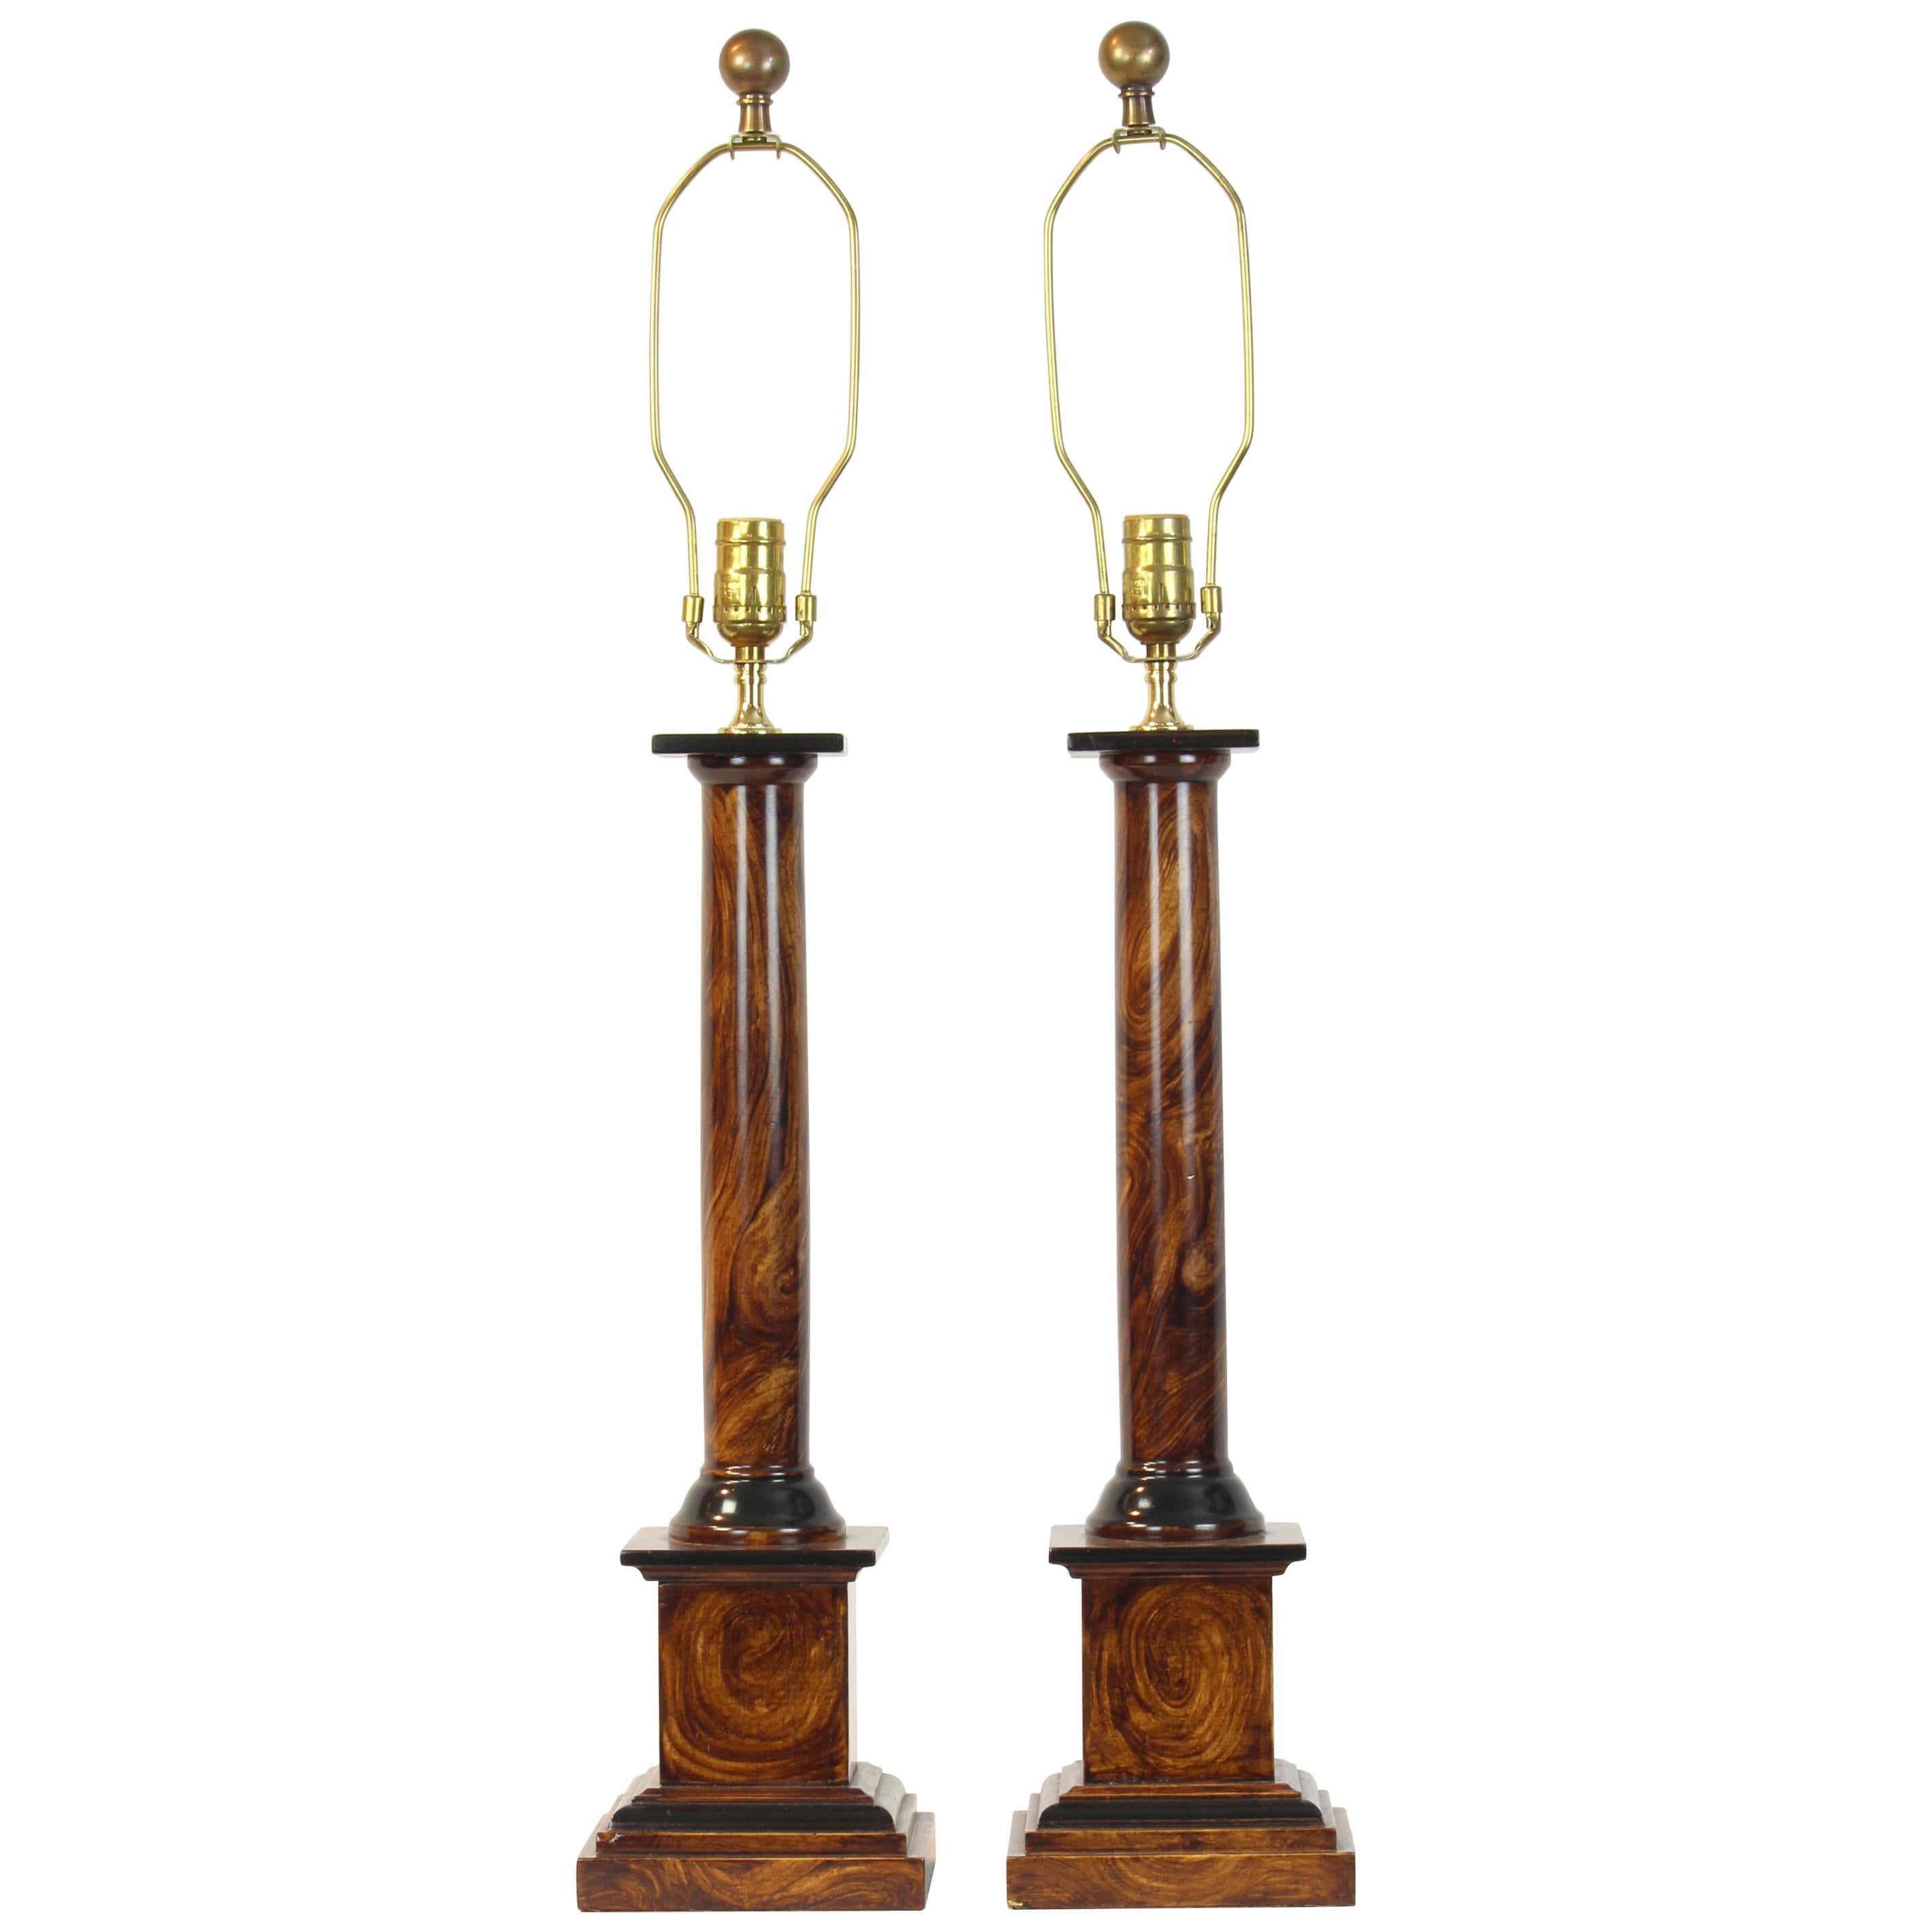 Pair of Column Form Table Lamps